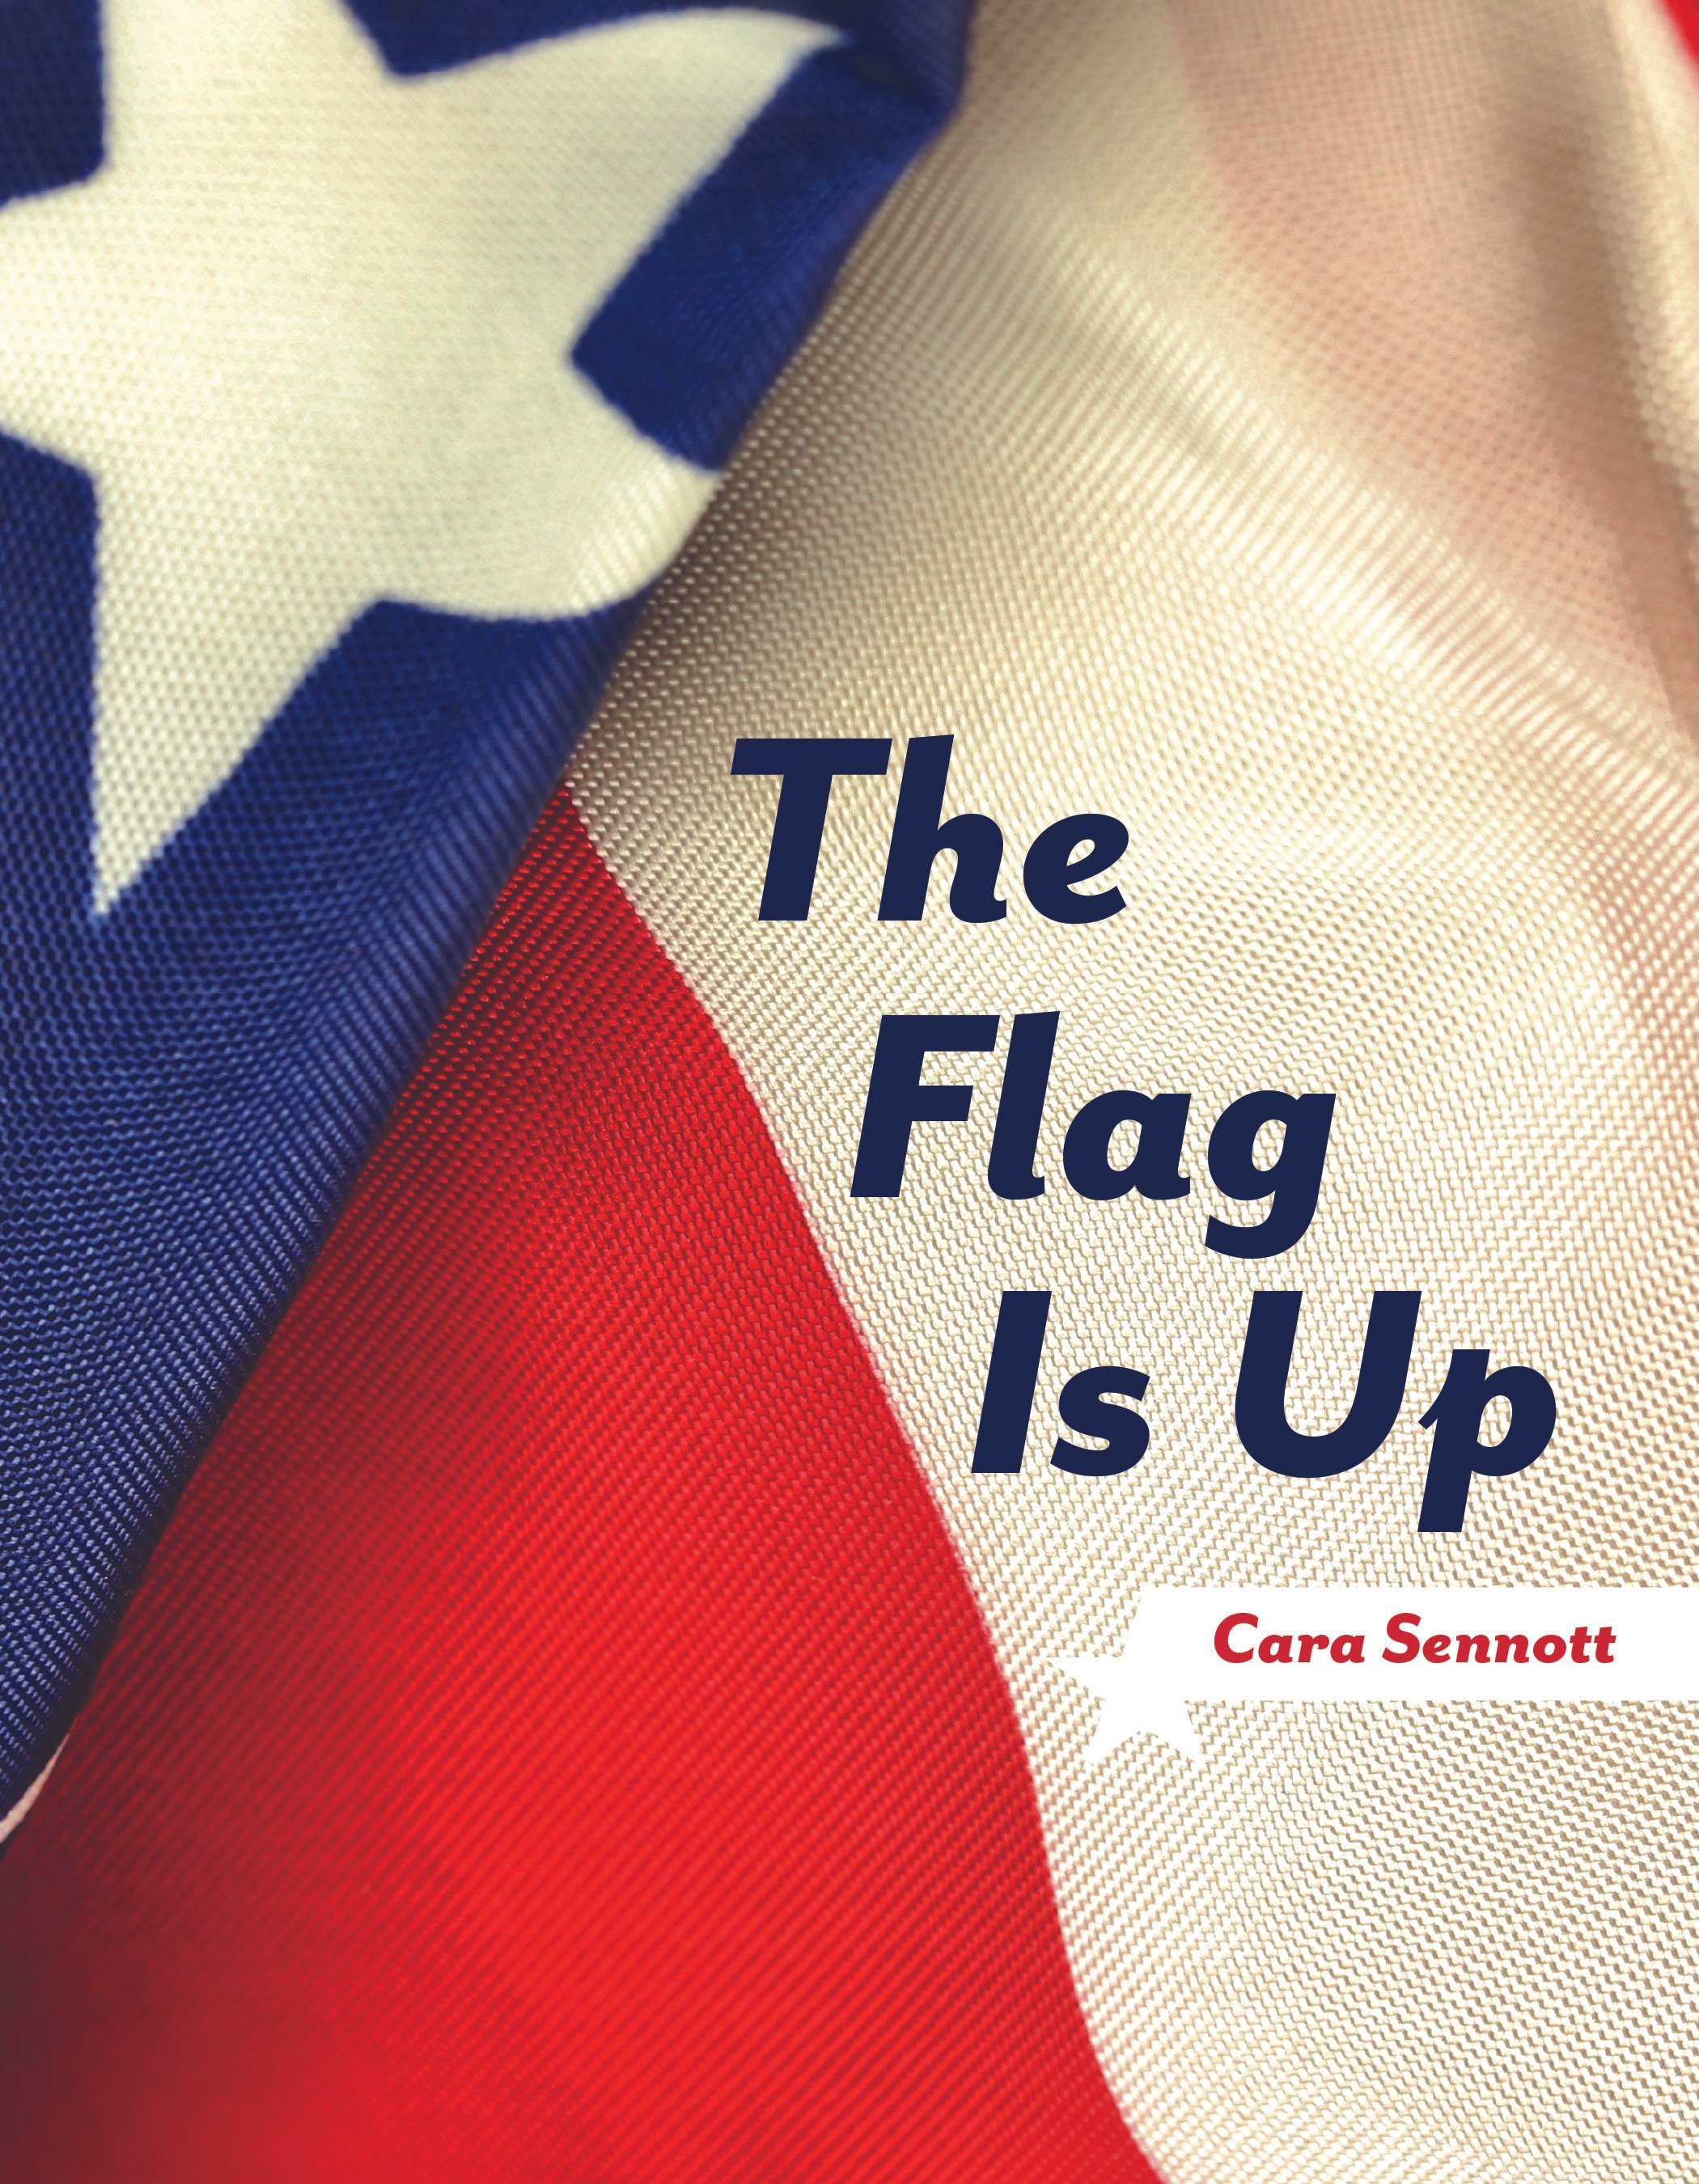 The Flag is Up cover.jpg